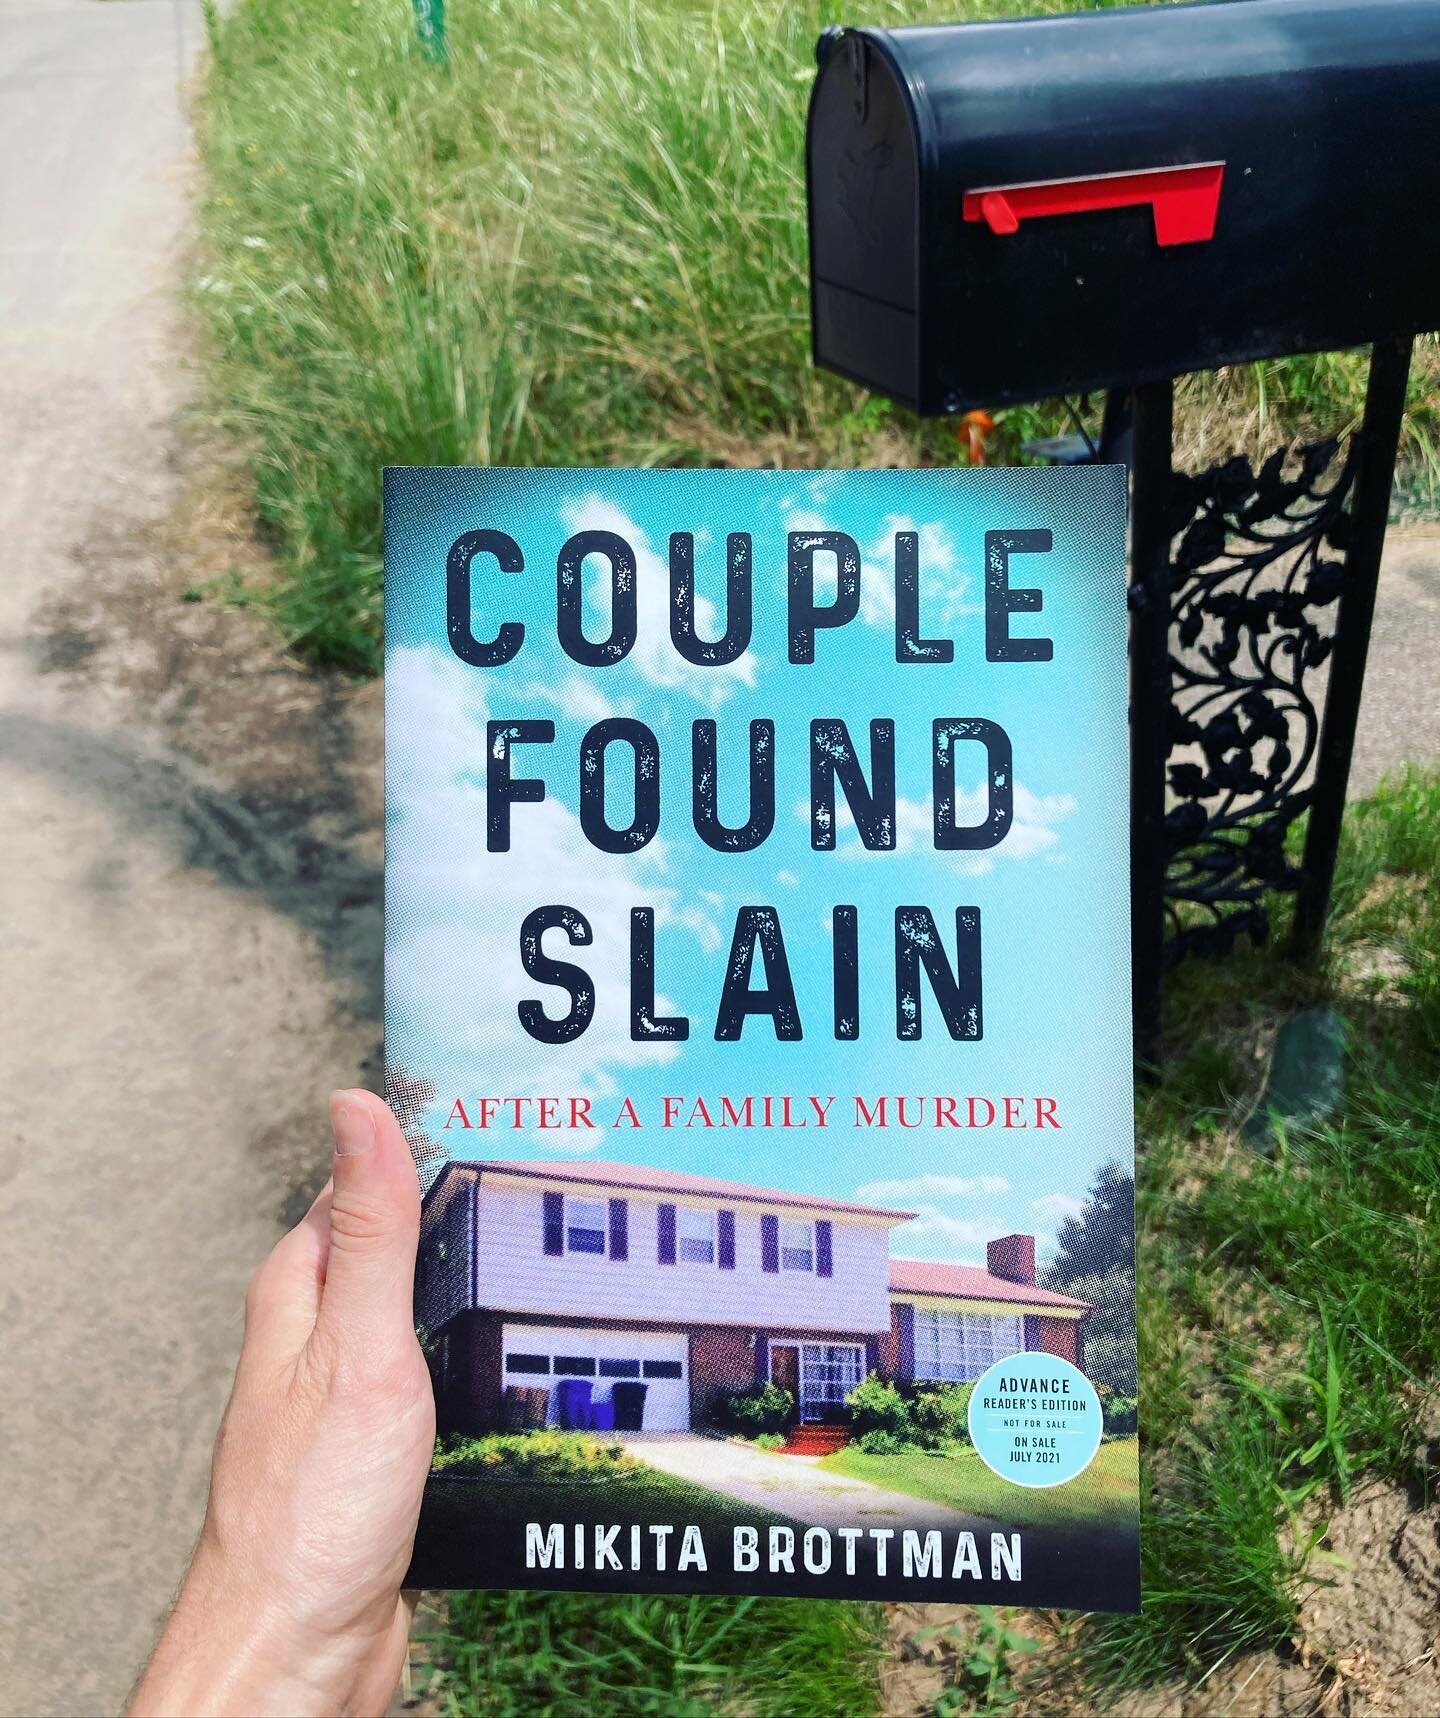 📚SWEEPSTAKES📚 Enter to win a hardcover copy of COUPLE FOUND SLAIN by Mikita Brottman, the perfect book for true crime fans. @nytbooks named it a 2021 Summer Reading Pick and called Brottman &ldquo;one of today&rsquo;s finest practitioners of nonfic